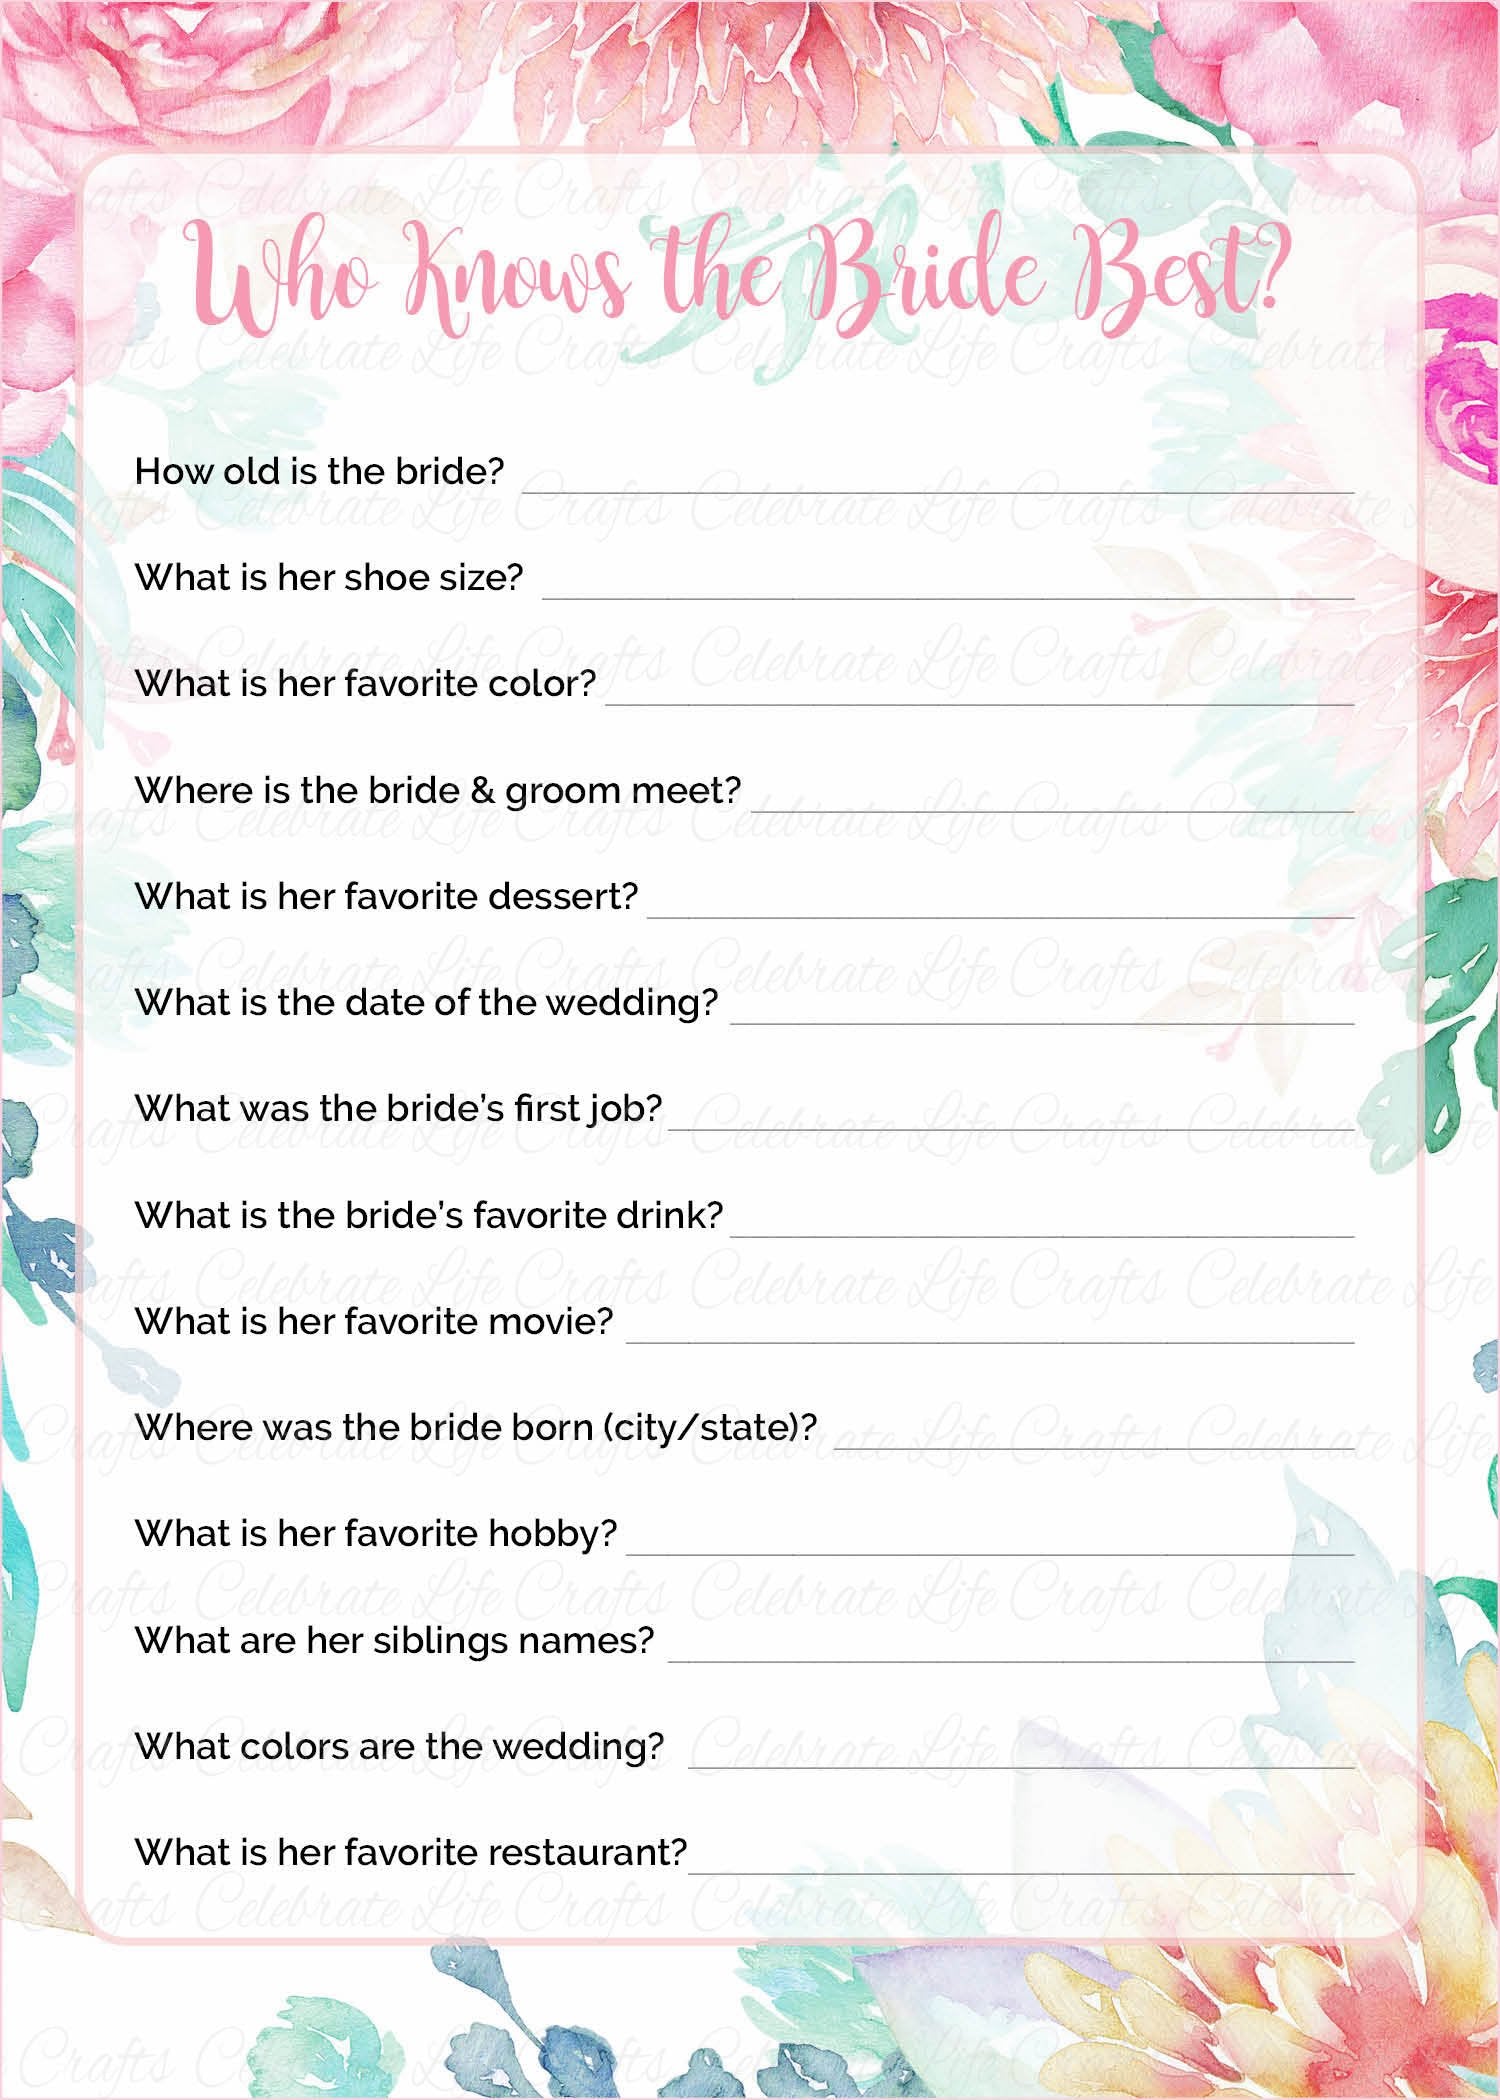 who knows the bride best bridal shower game pink floral